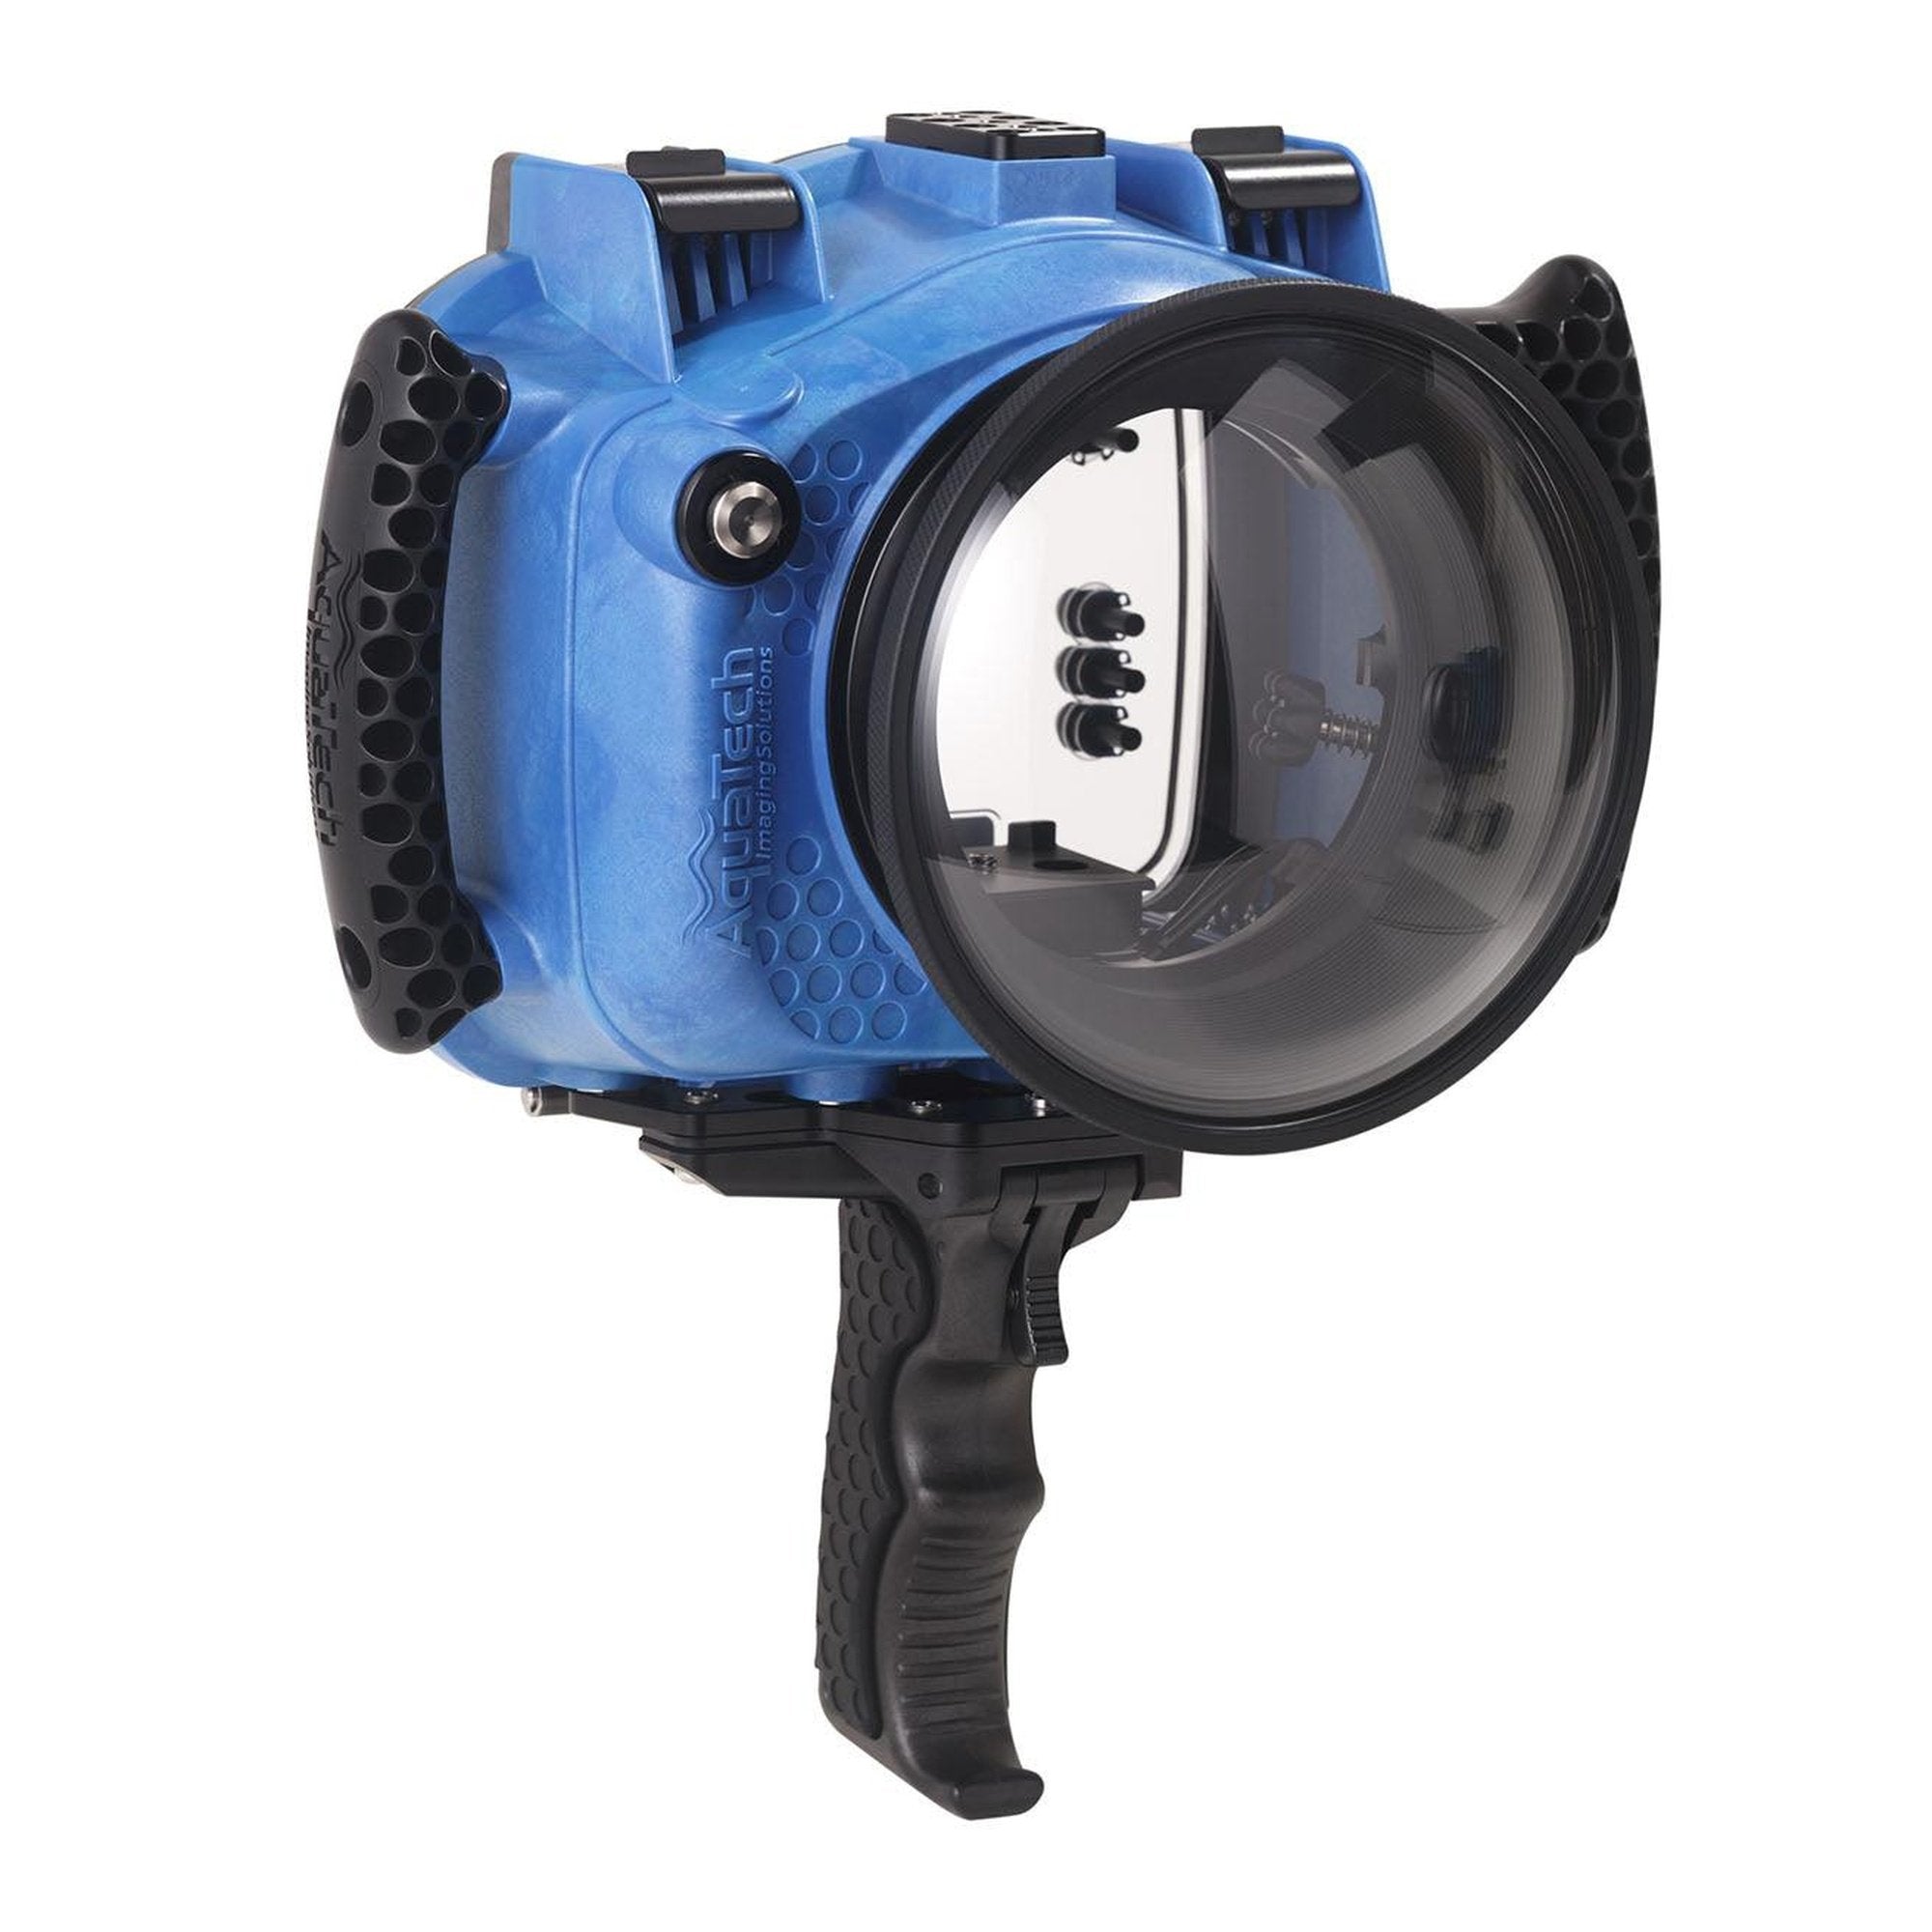 AxisGO Underwater Housing for iPhone 12 – AquaTech Imaging Solutions